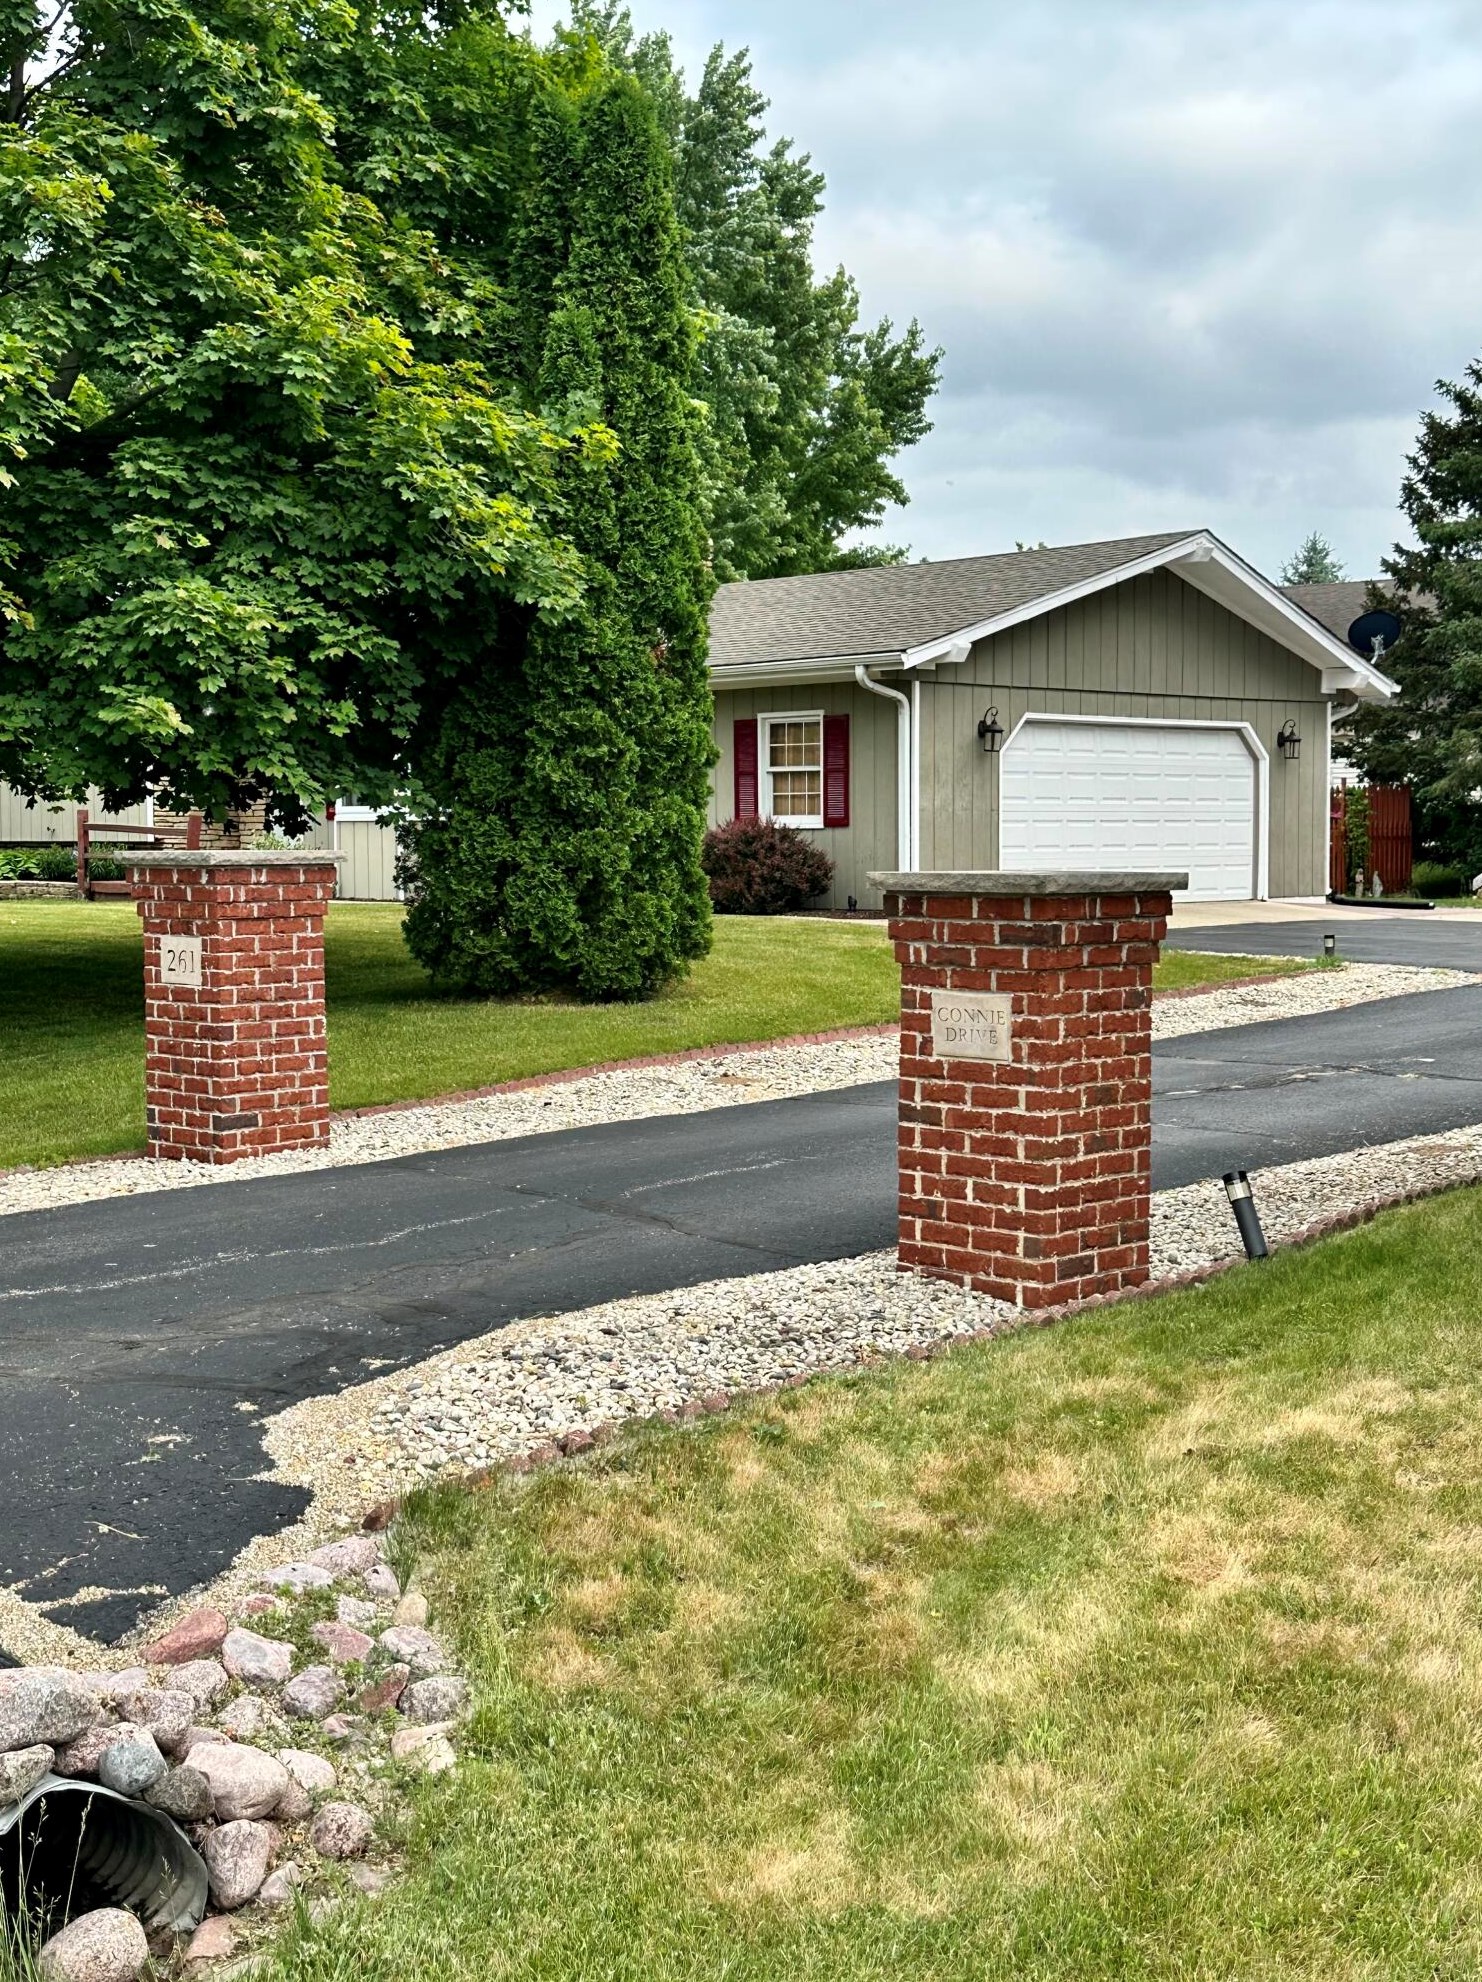 261 Connie Dr, West Bend, WI 53090